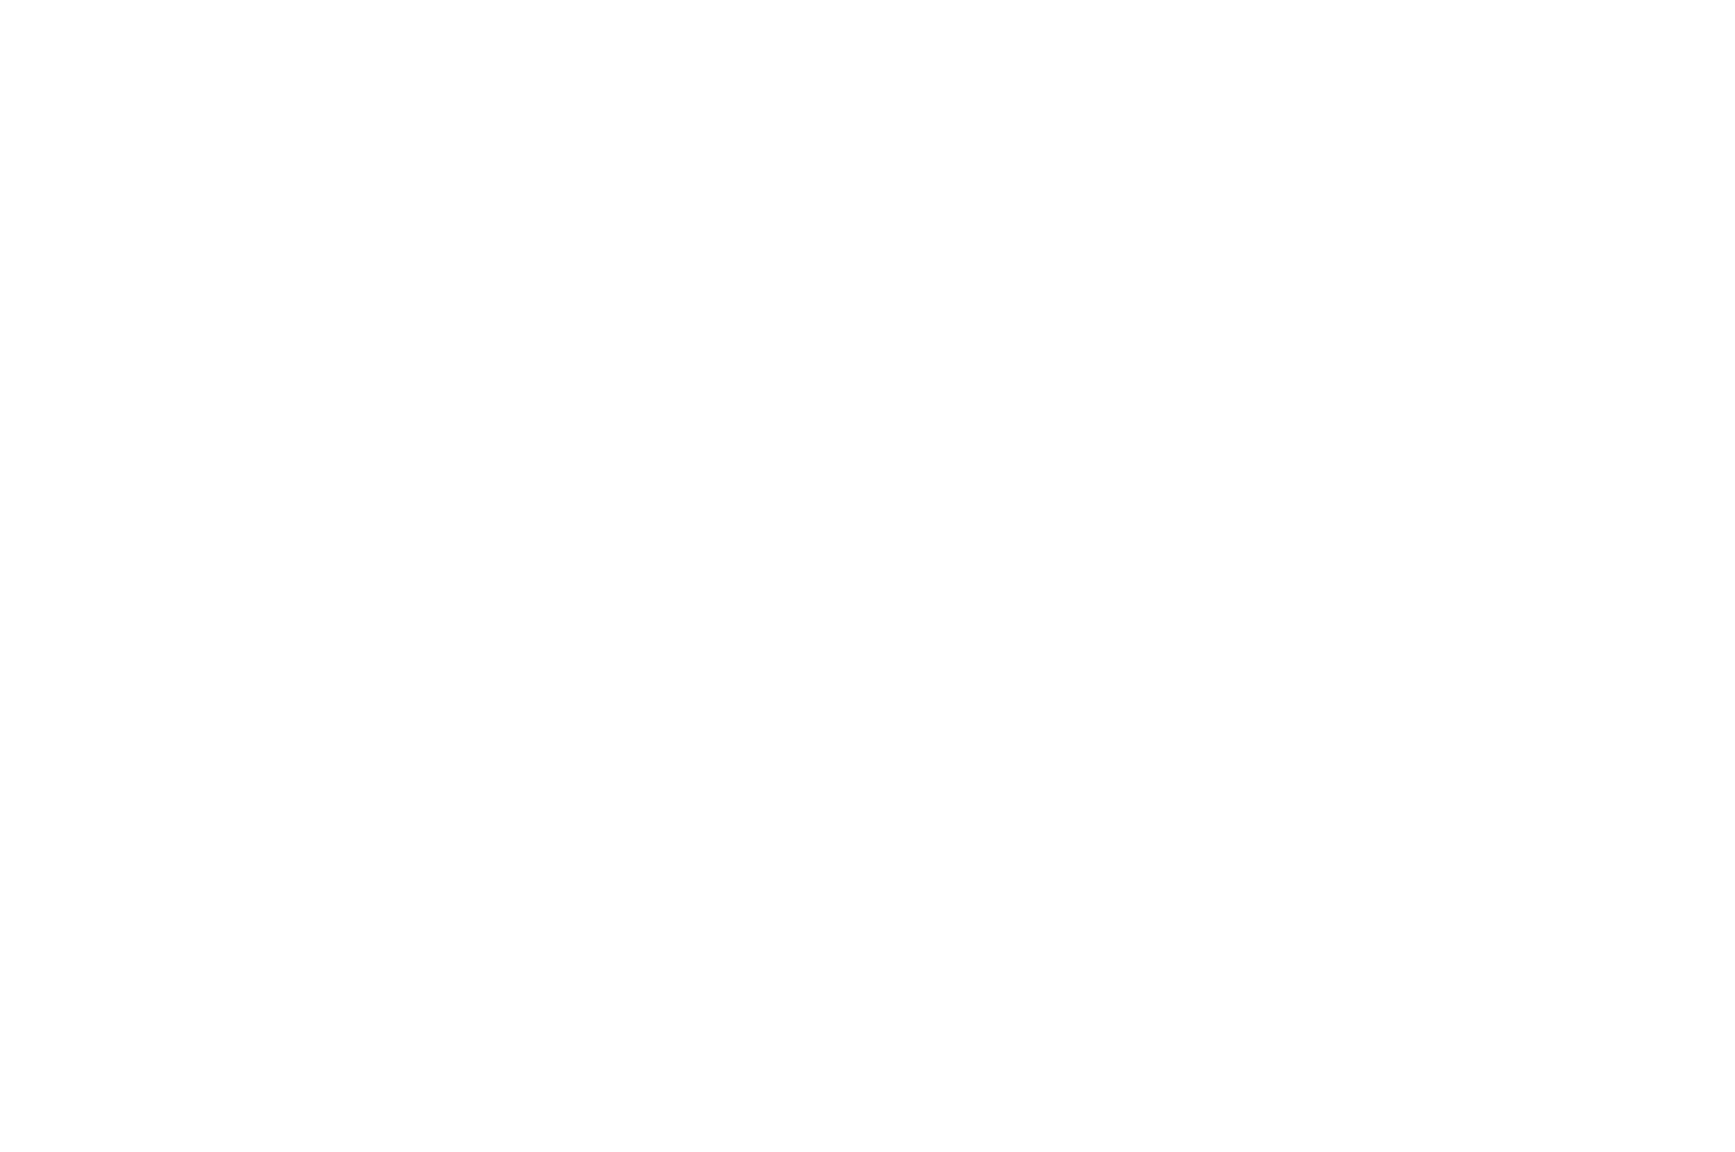 NOMINEE - Clean Shorts Film Festival - 2021.png